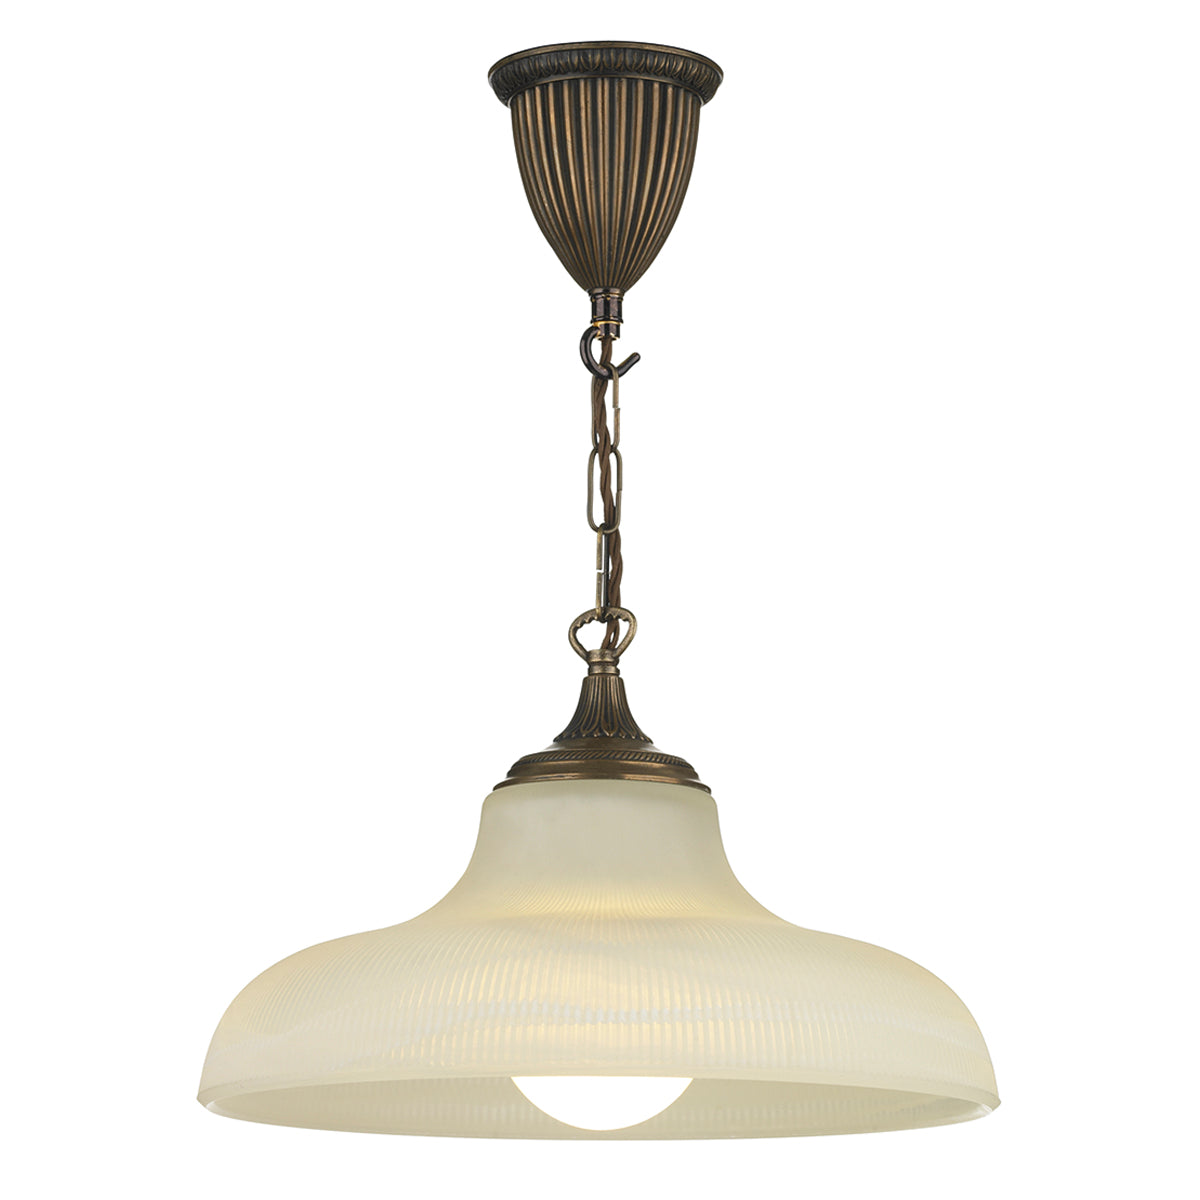 This pendant light has a large ceiling rose with a ribbed detail finished in a bronze colour, it has a chain hanging down with a creamy alabaster glass that is circular and ribbed its a thick heavy glass that is shallow and wide so you will see the bulb pointing out underneath.